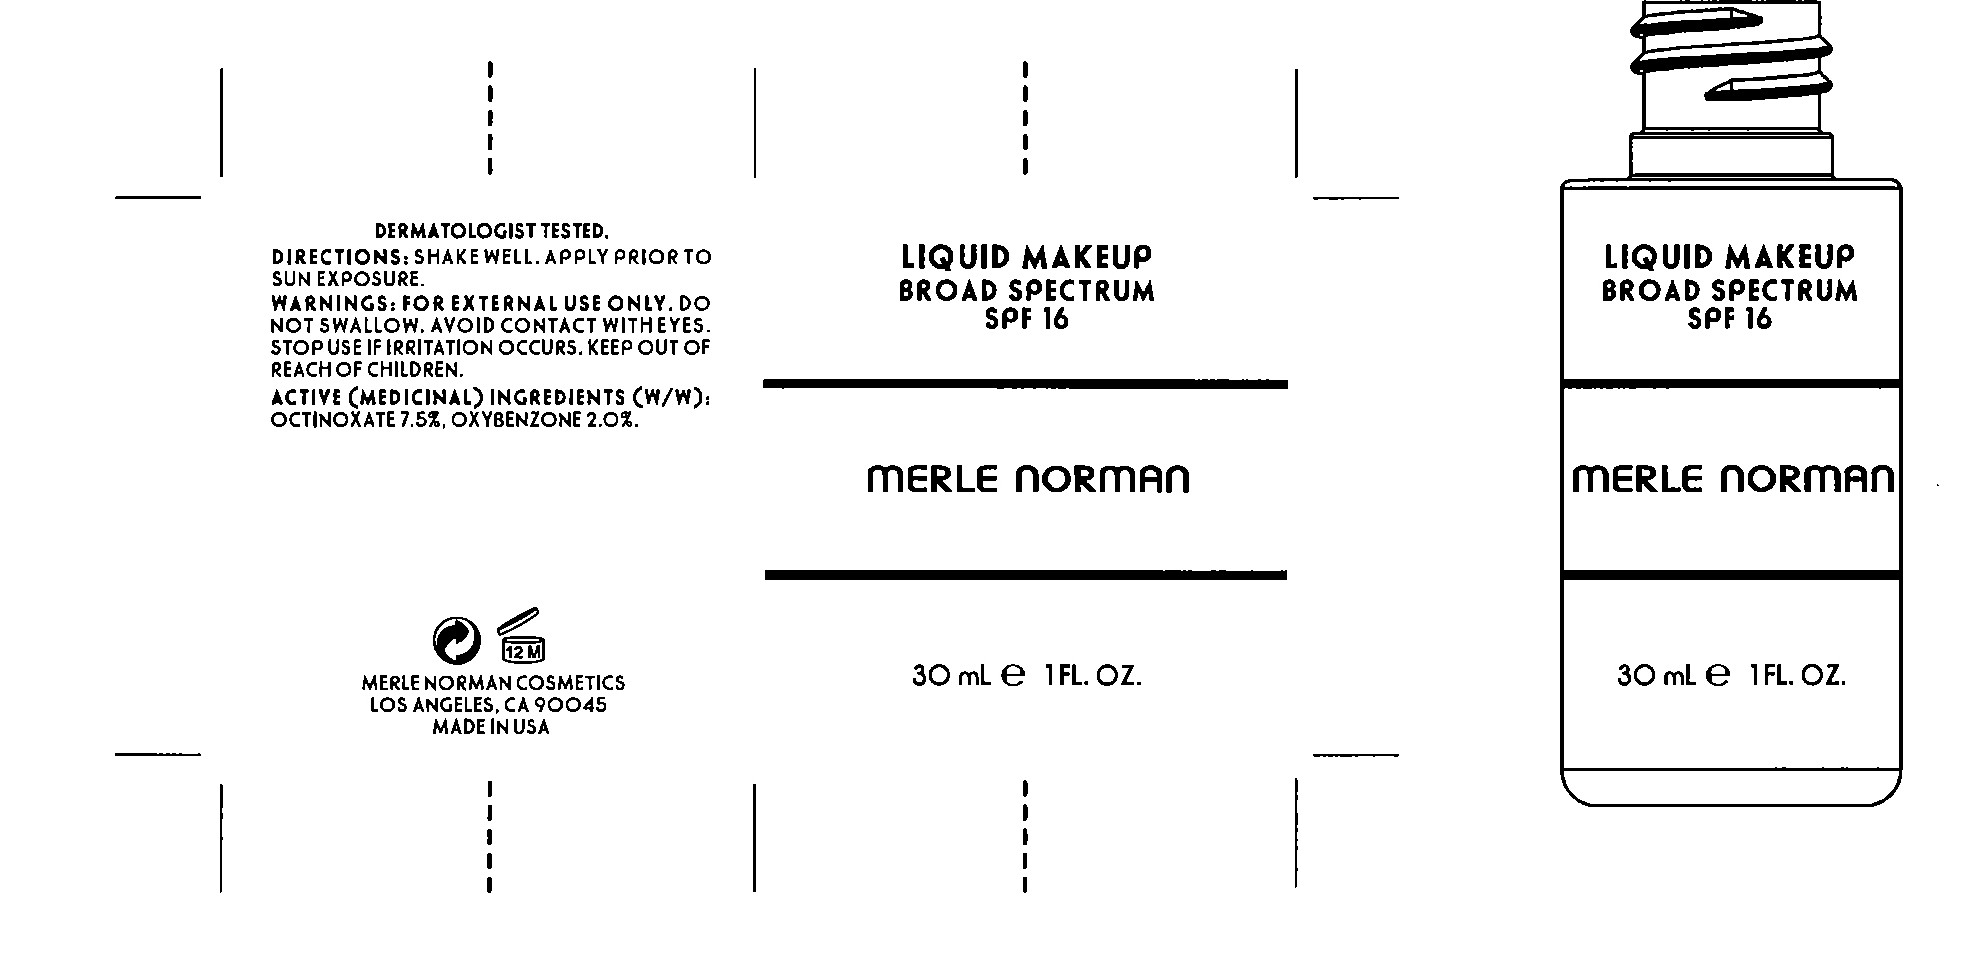 image of primary label